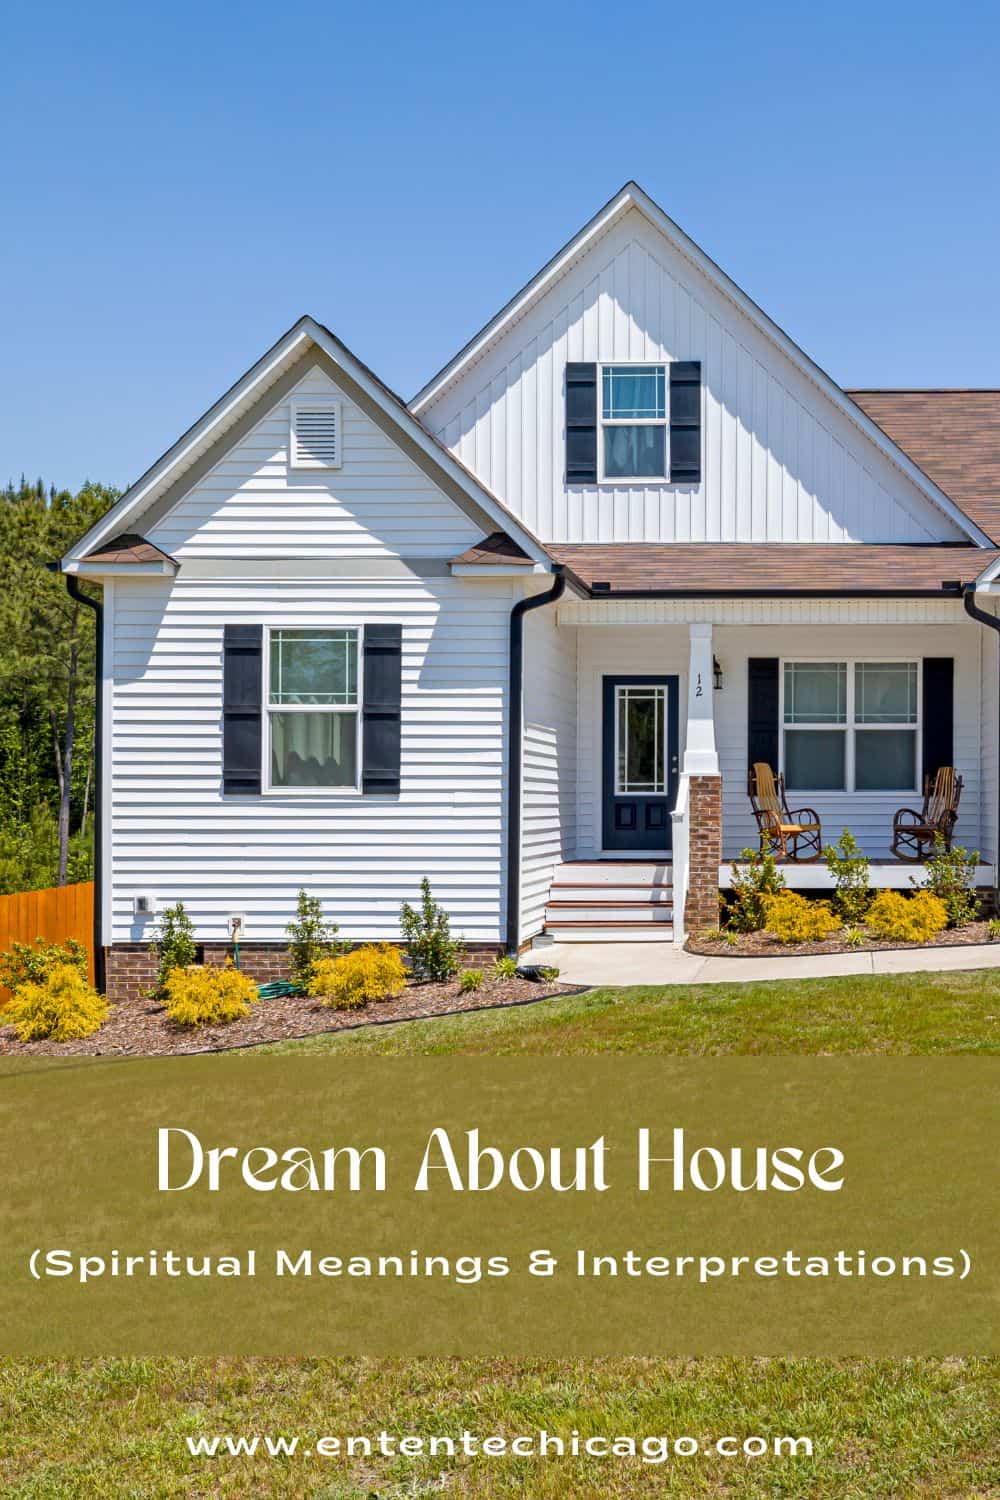 Dream About House (Spiritual Meanings & Interpretations)